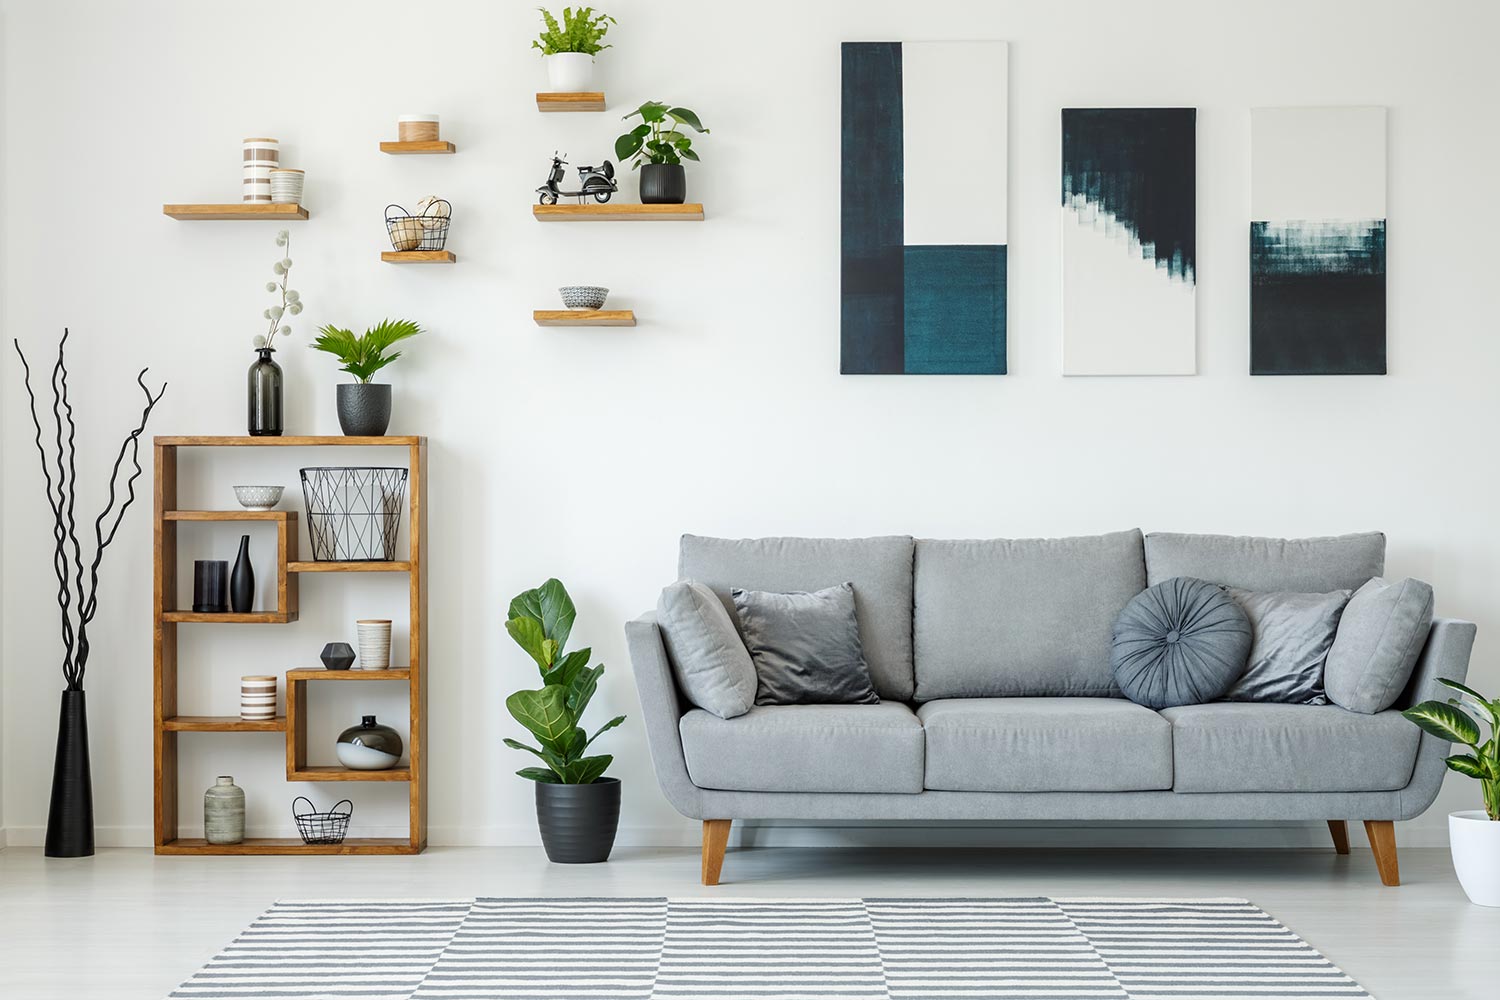 Elegant living room interior with a grey sofa, wooden shelves, plants and paintings on the wall